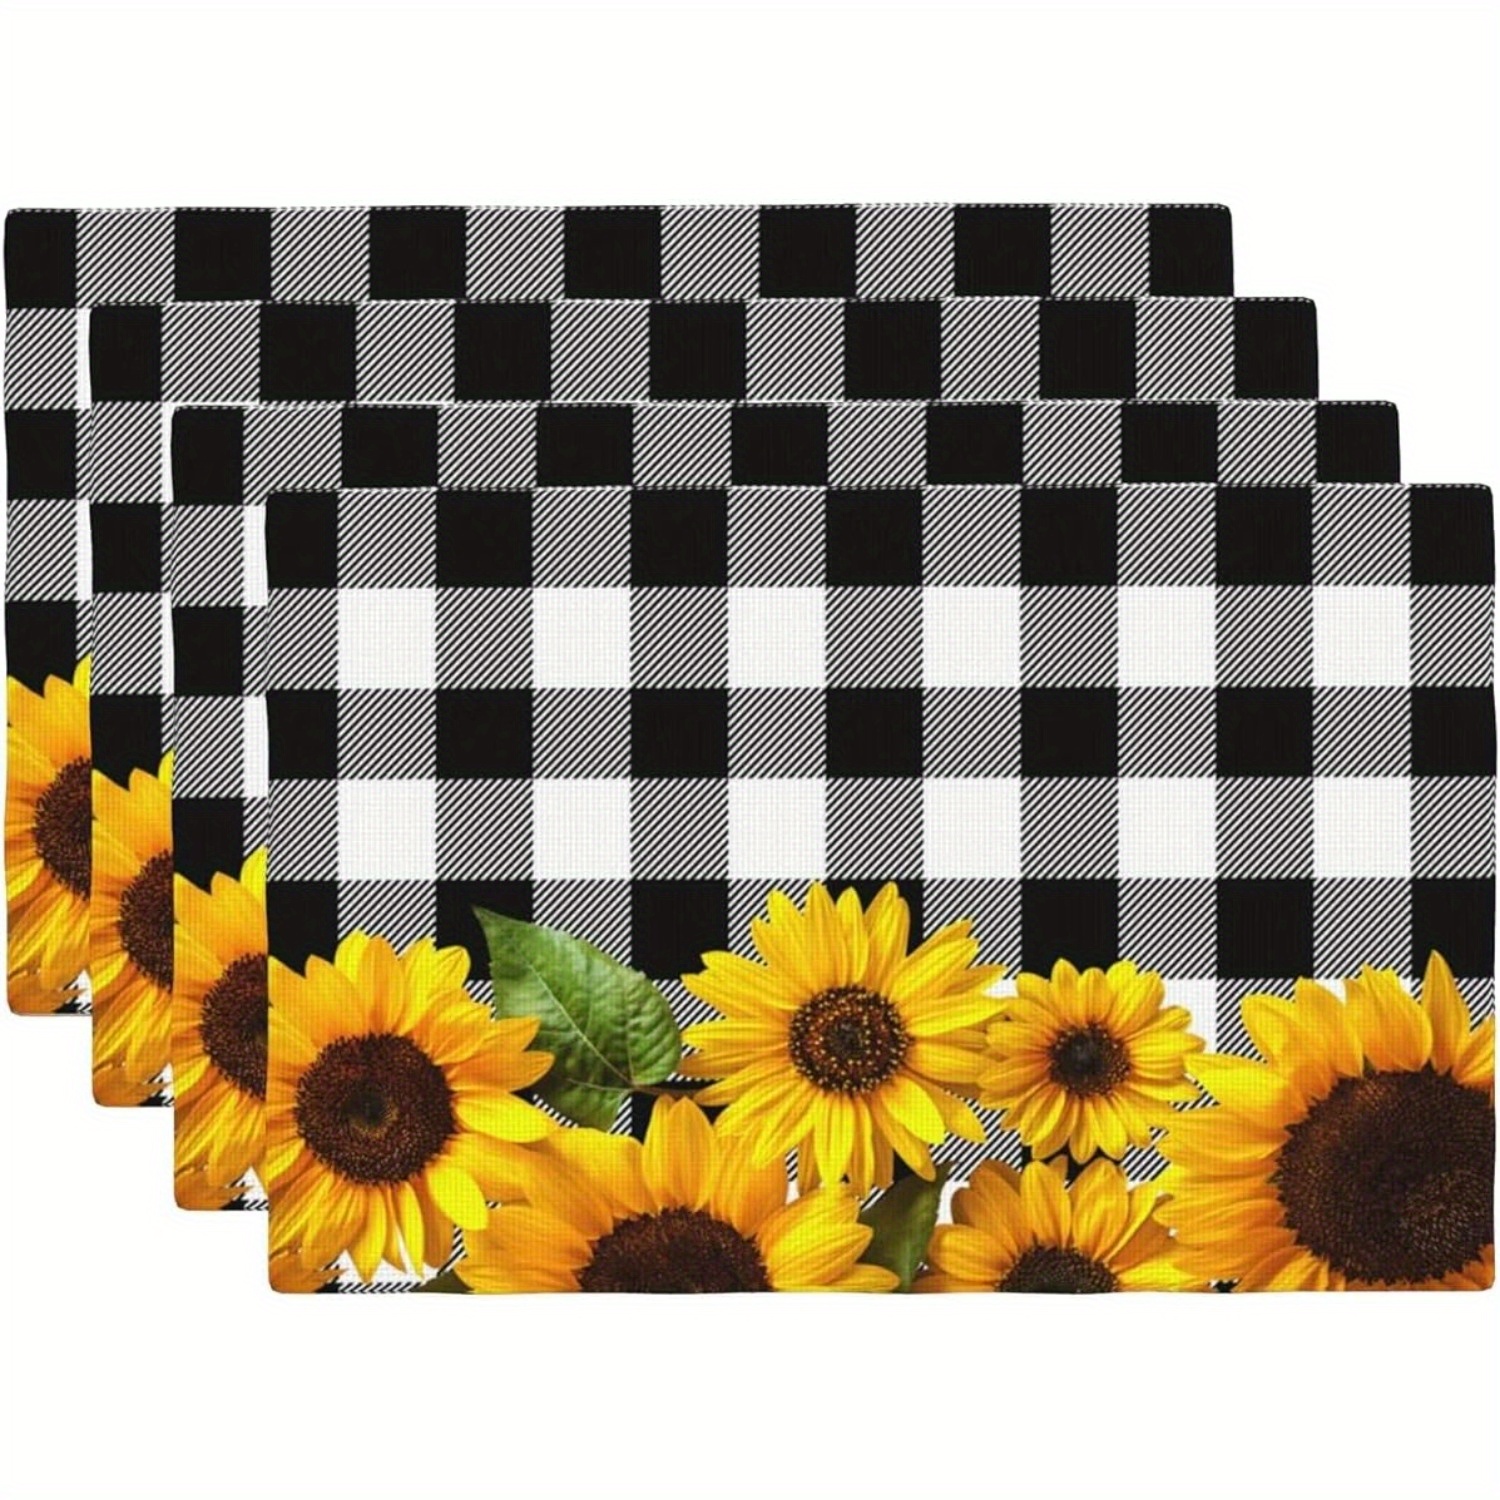 

4pcs, Table Pads, Buffalo Check Placemats With Sunflower Design, Black And White Plaid Farmhouse Style Linen Table Mats, Washable And Reusable Dining Place Mats